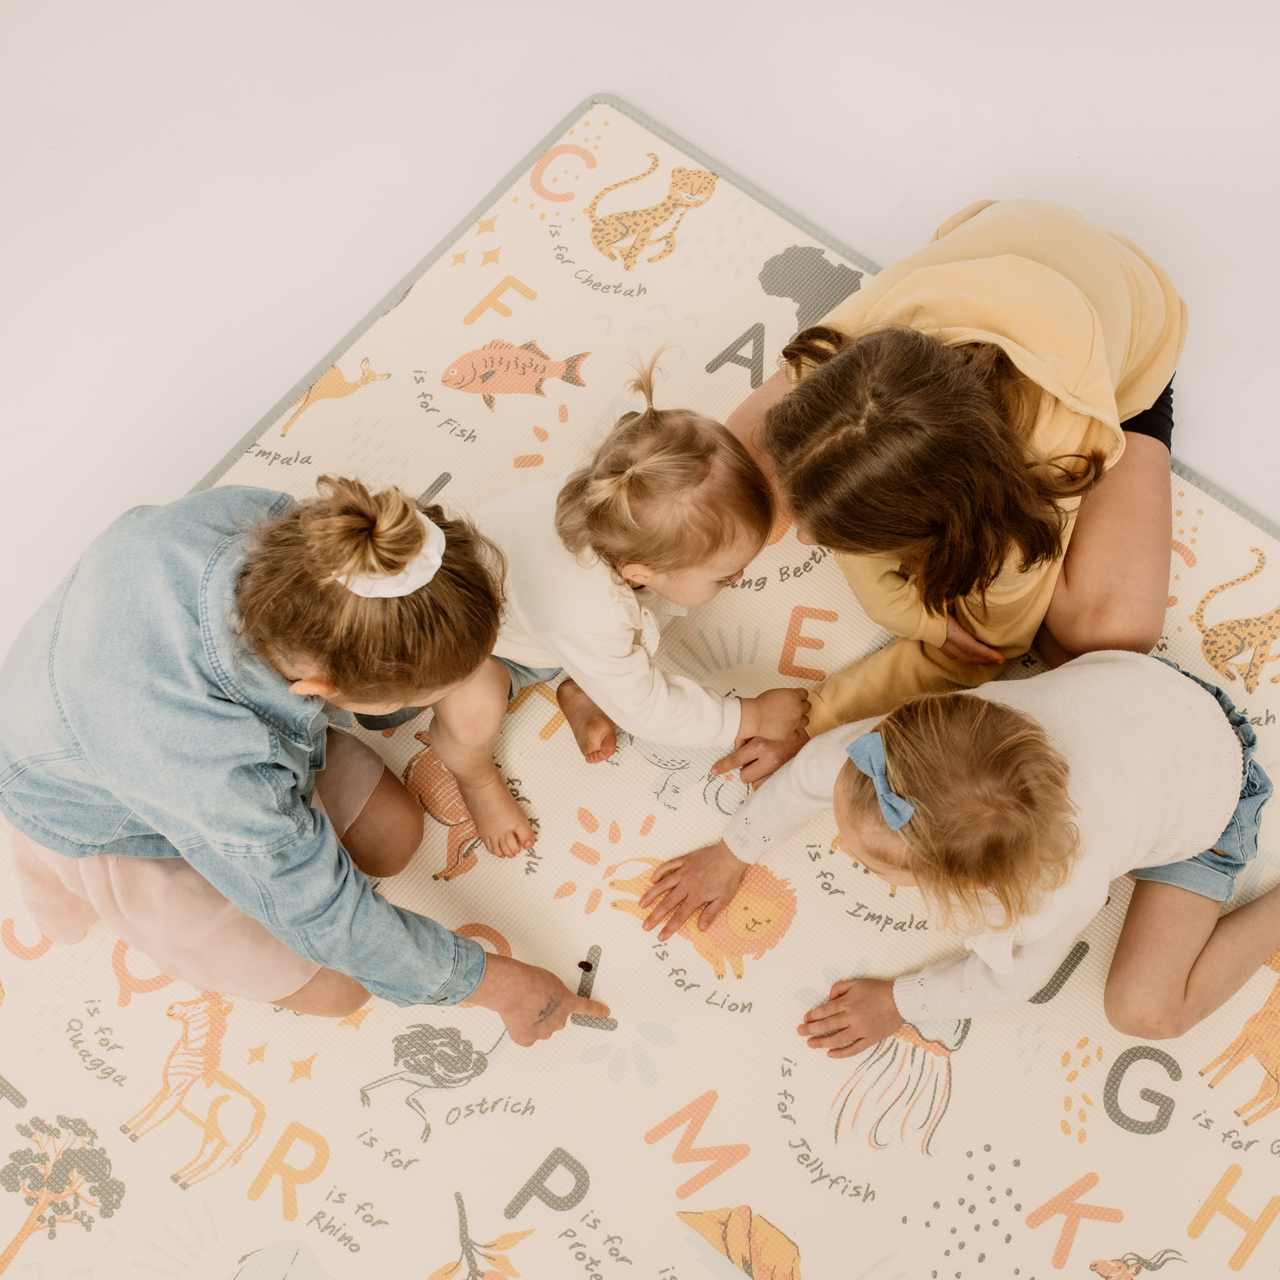 ABC Africa/ Grey Speckled Play Mat